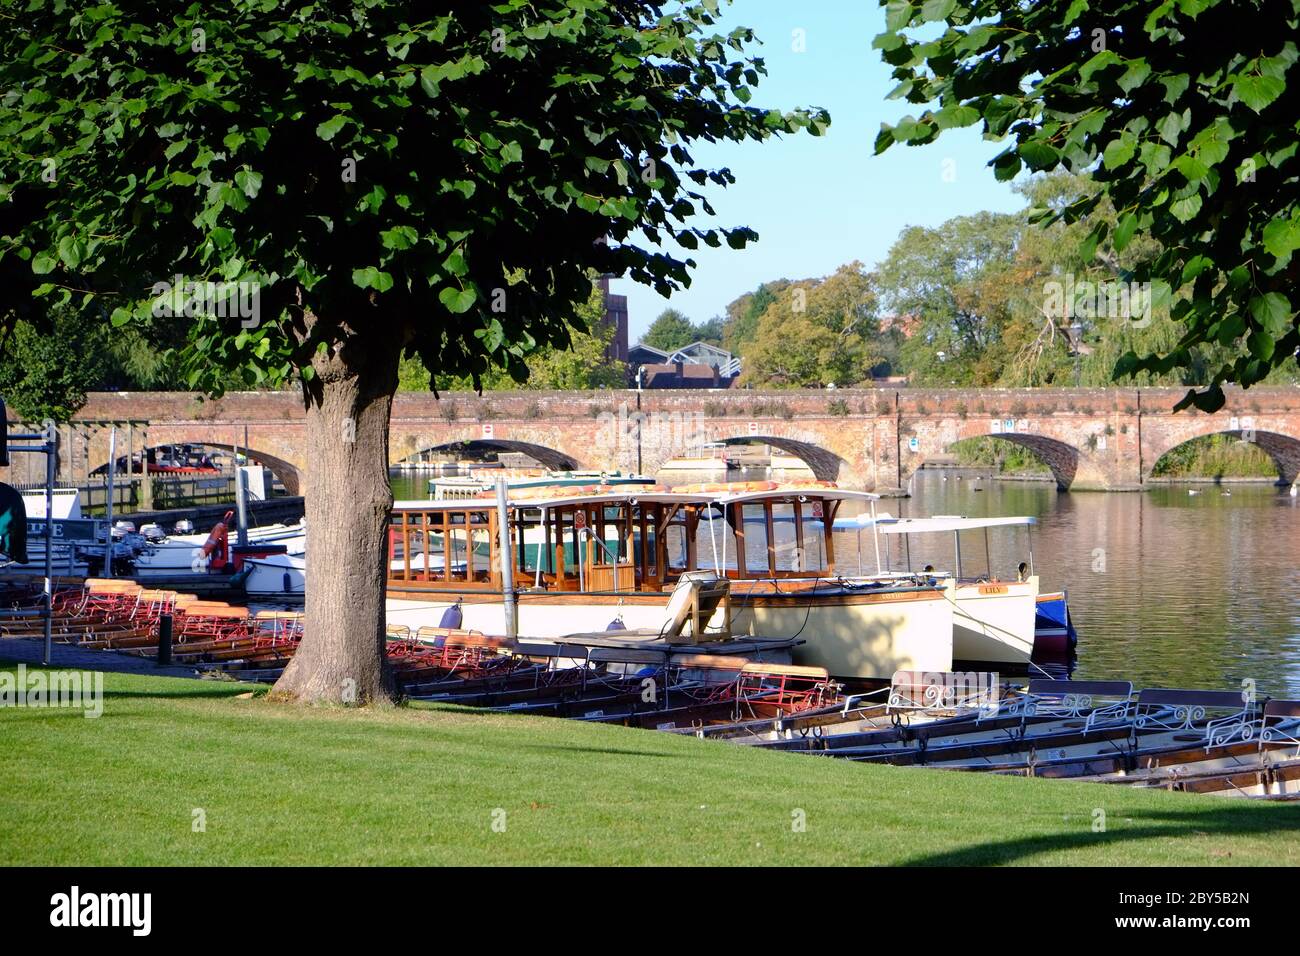 Tour boats and rowing boats on the River Avon, at Stratford-upon-Avon, Warwickshire, England. Stock Photo